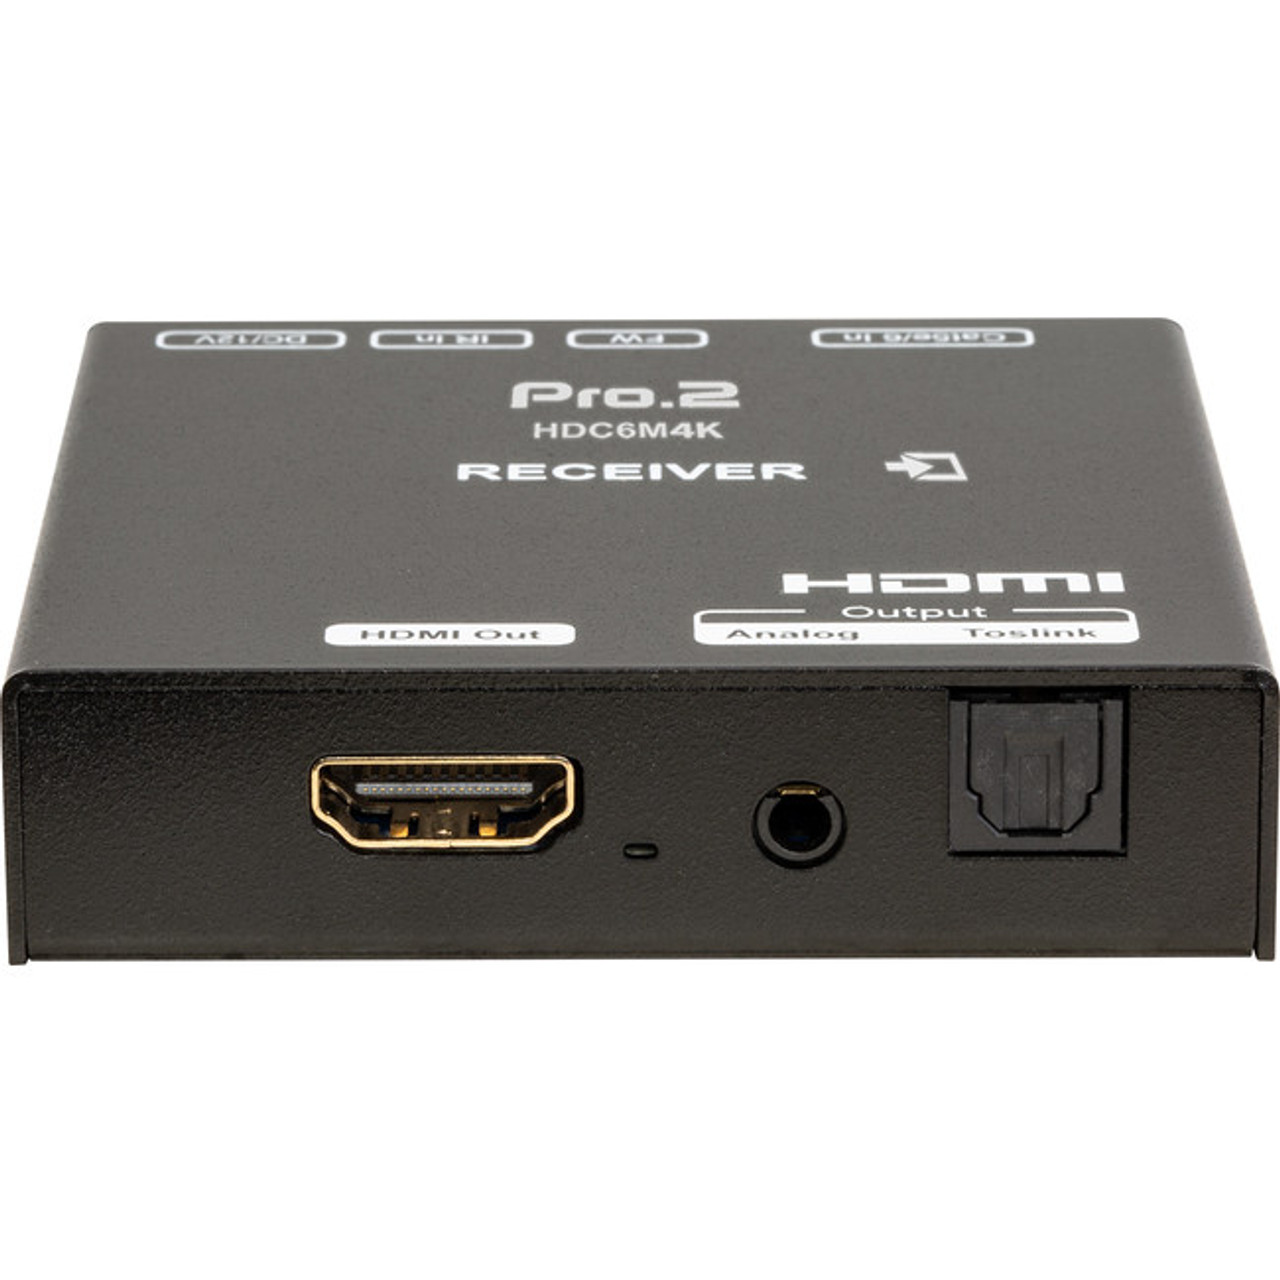 Pro.2 HDC6M4K 4K HDR HDMI Over Cat6 Extender Kit with IR (70m)